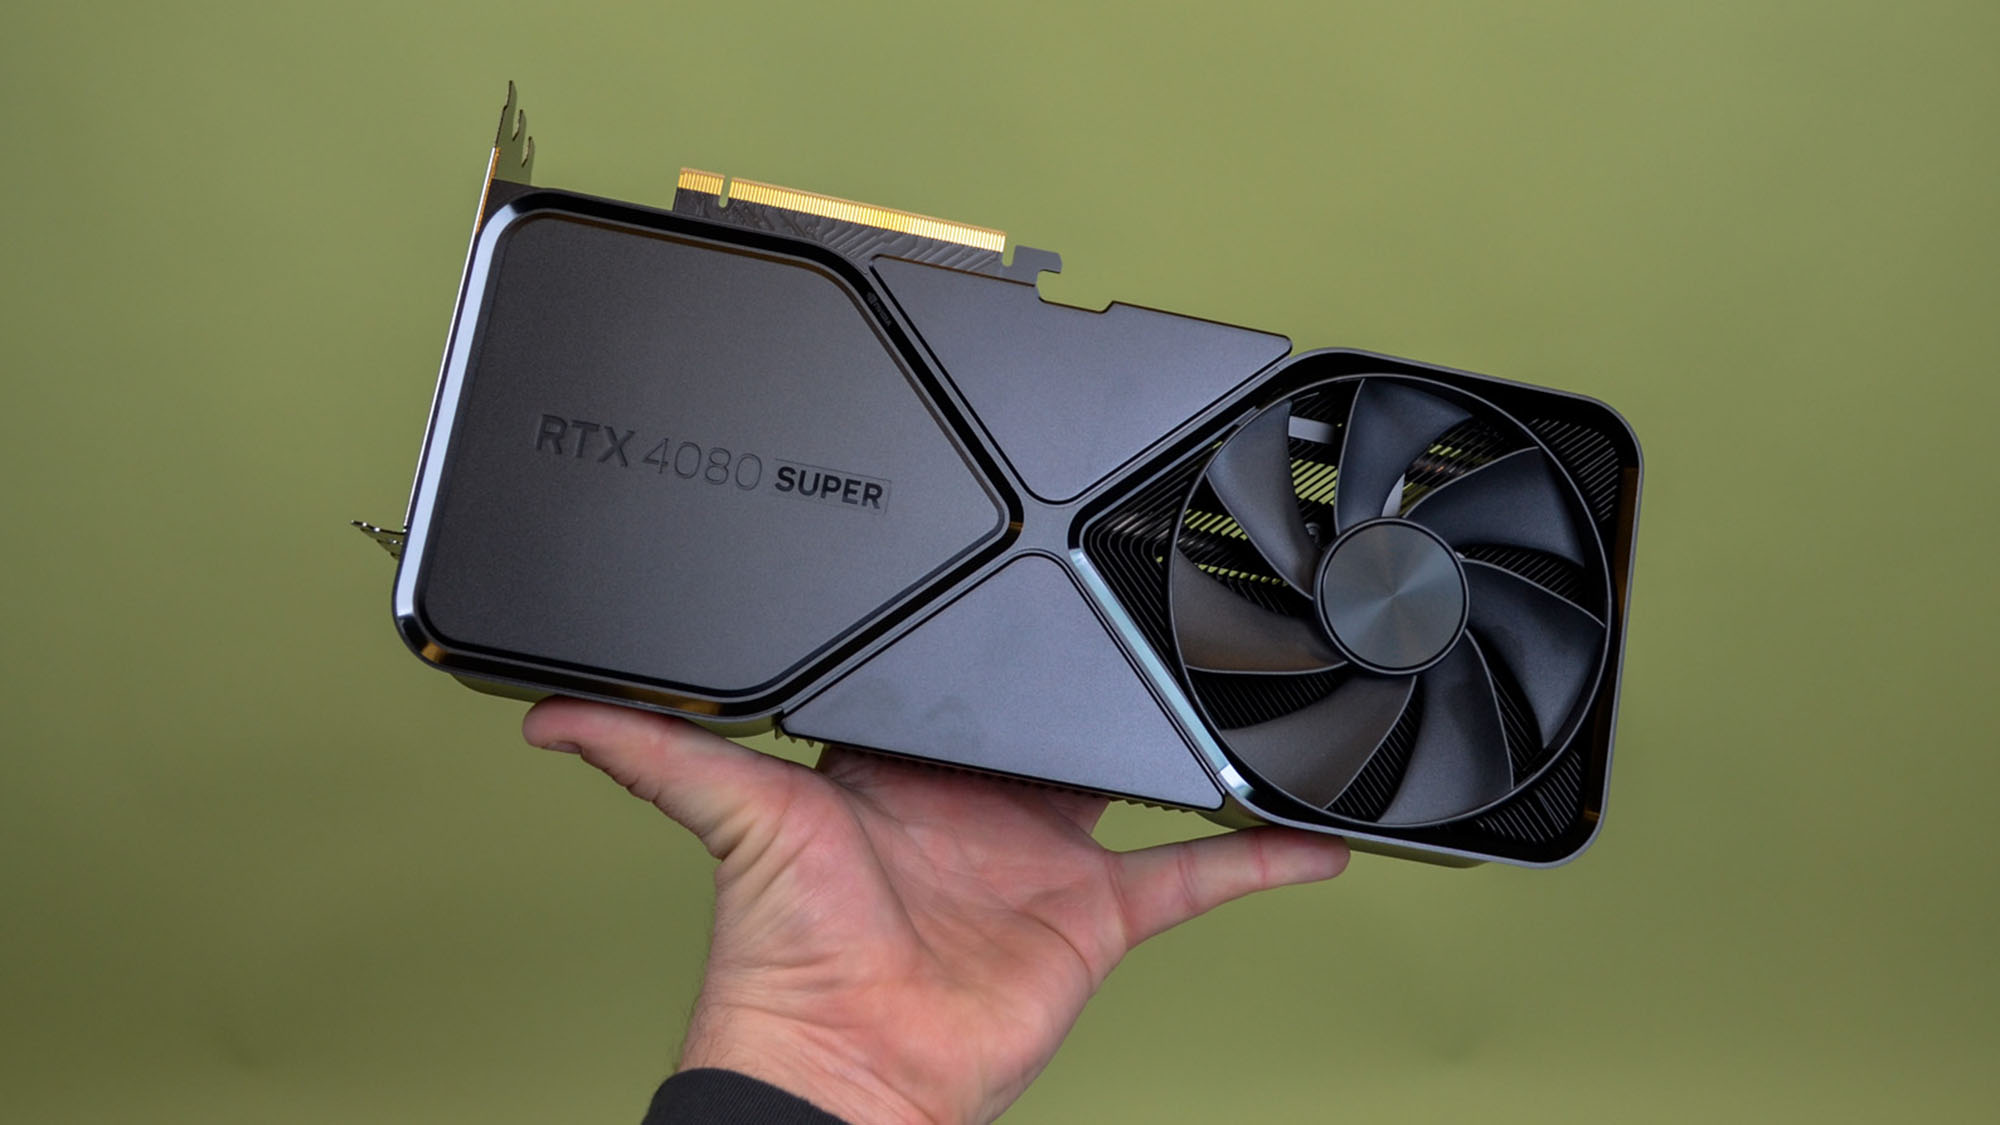 A masculine hand holding the Nvidia GeForce RTX 4080 Super